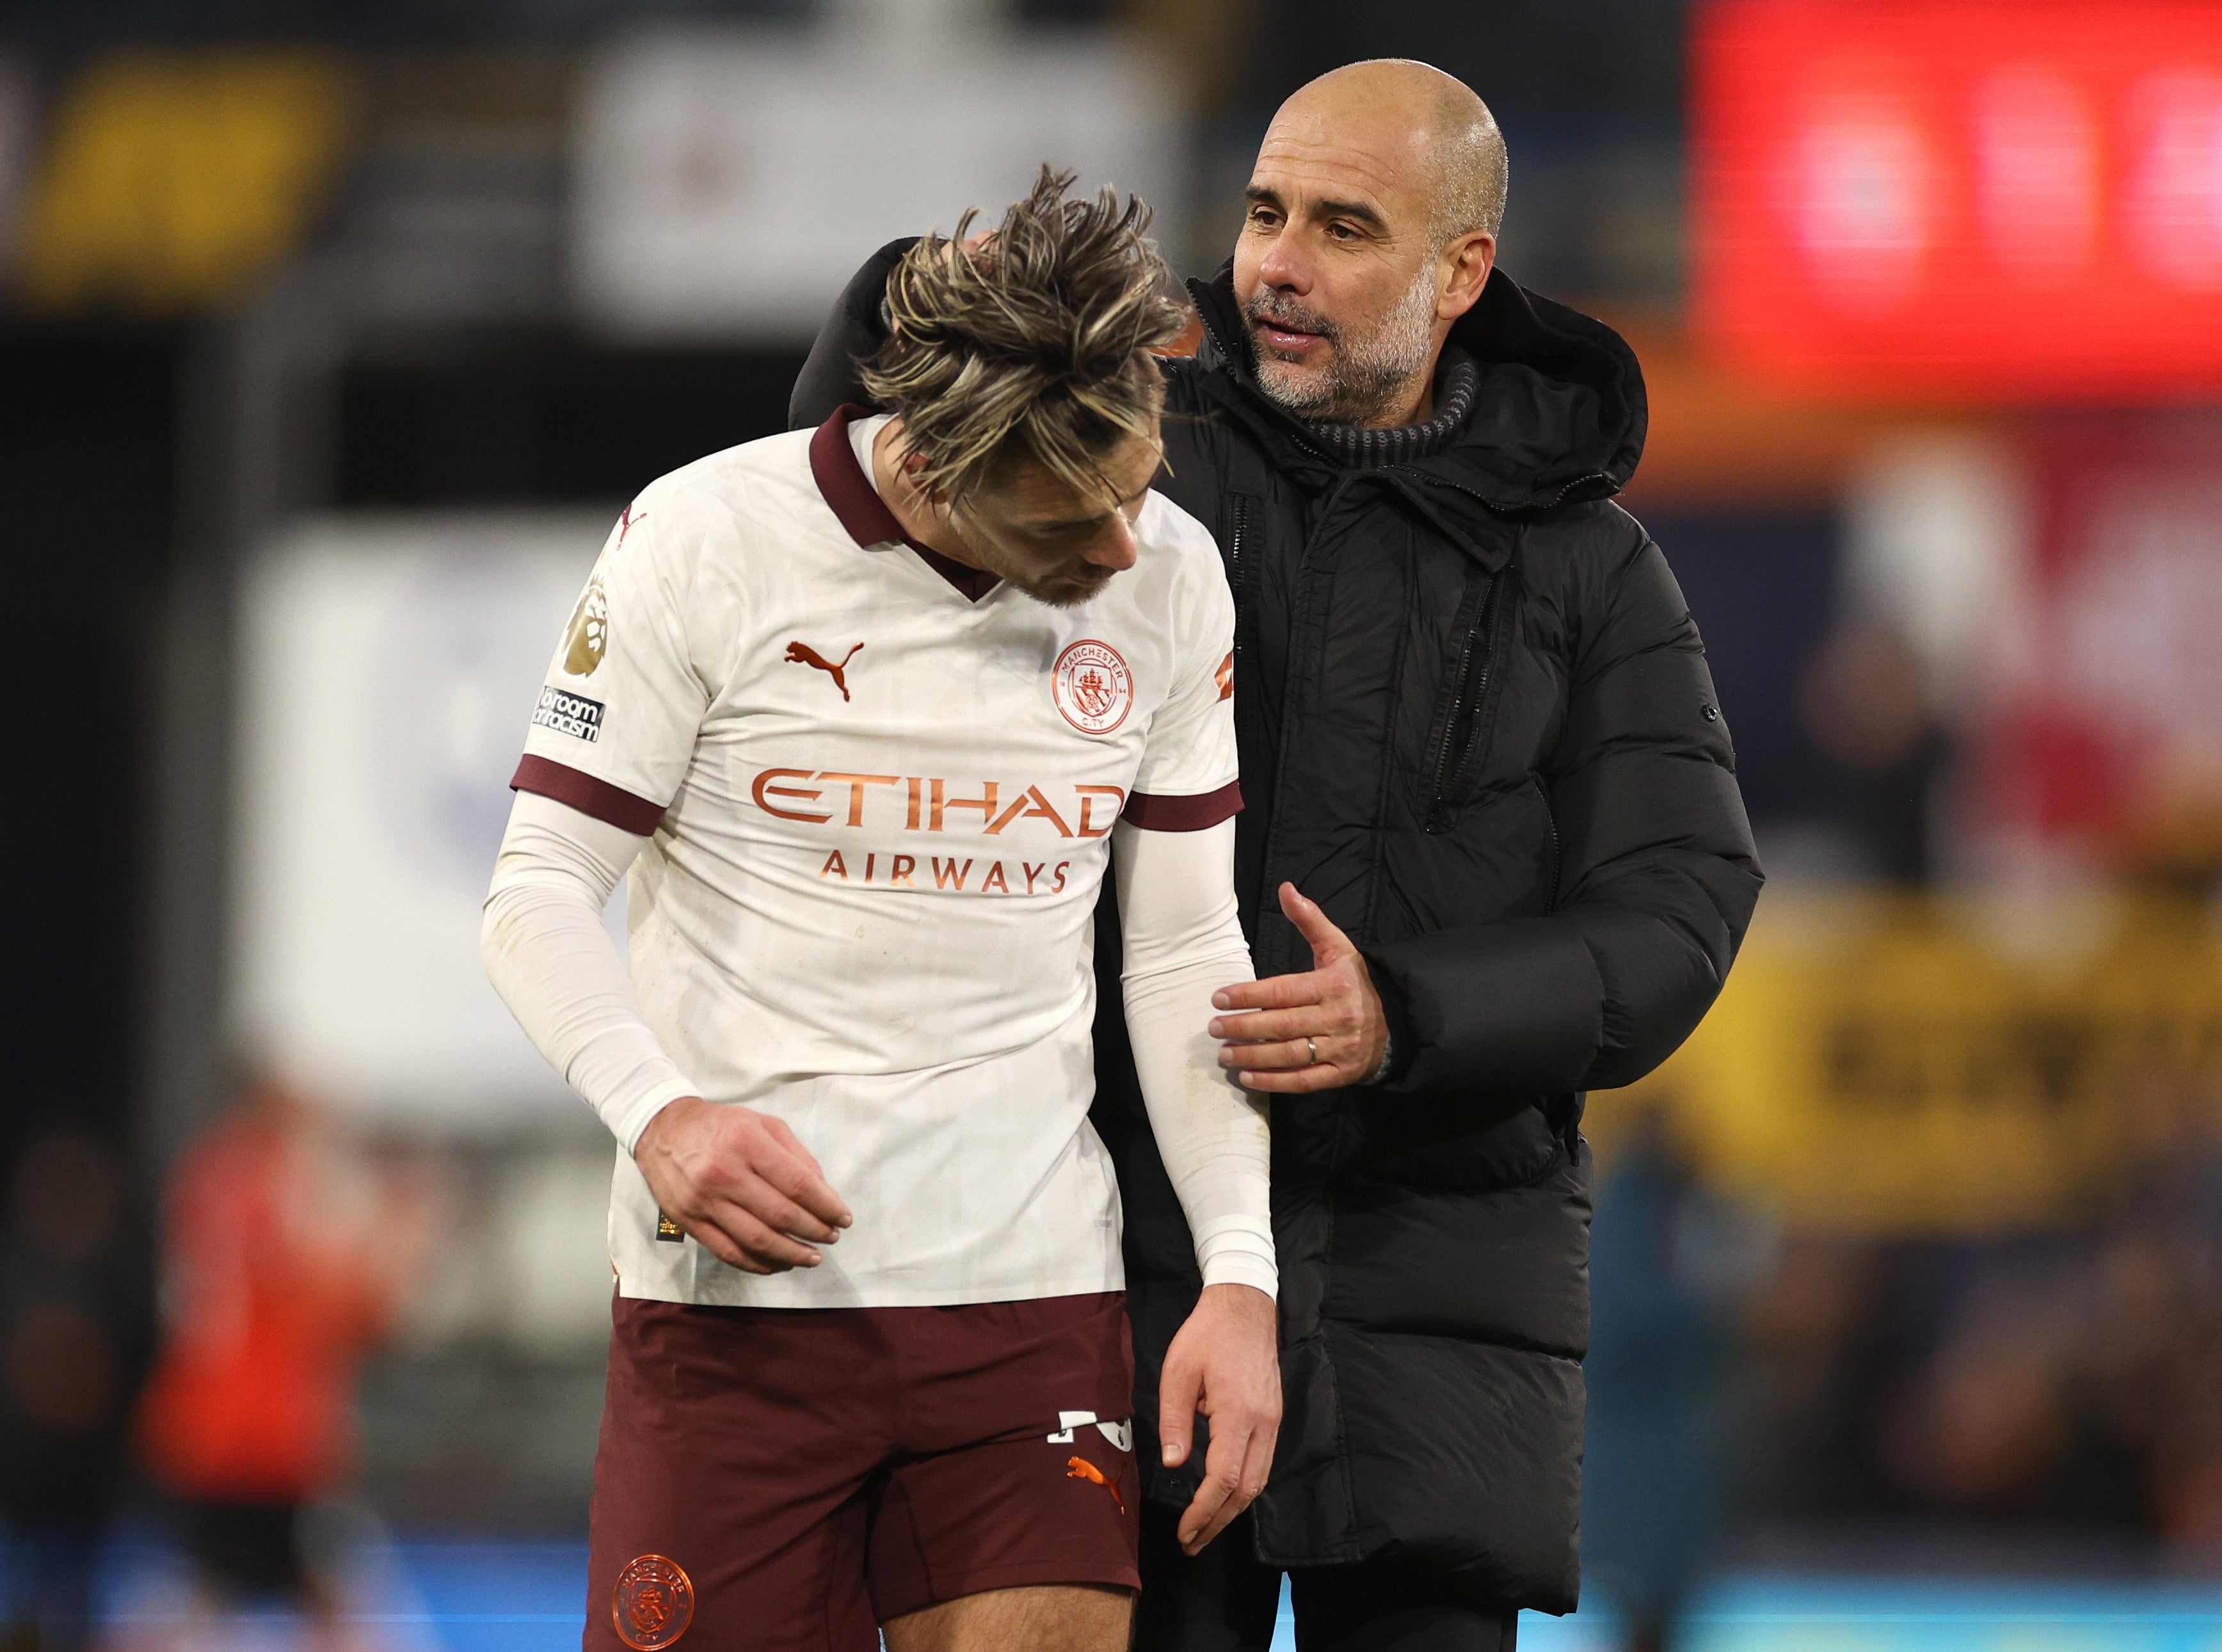 Jack Grealish and Pep Guardiola celebrate an important win for Man City